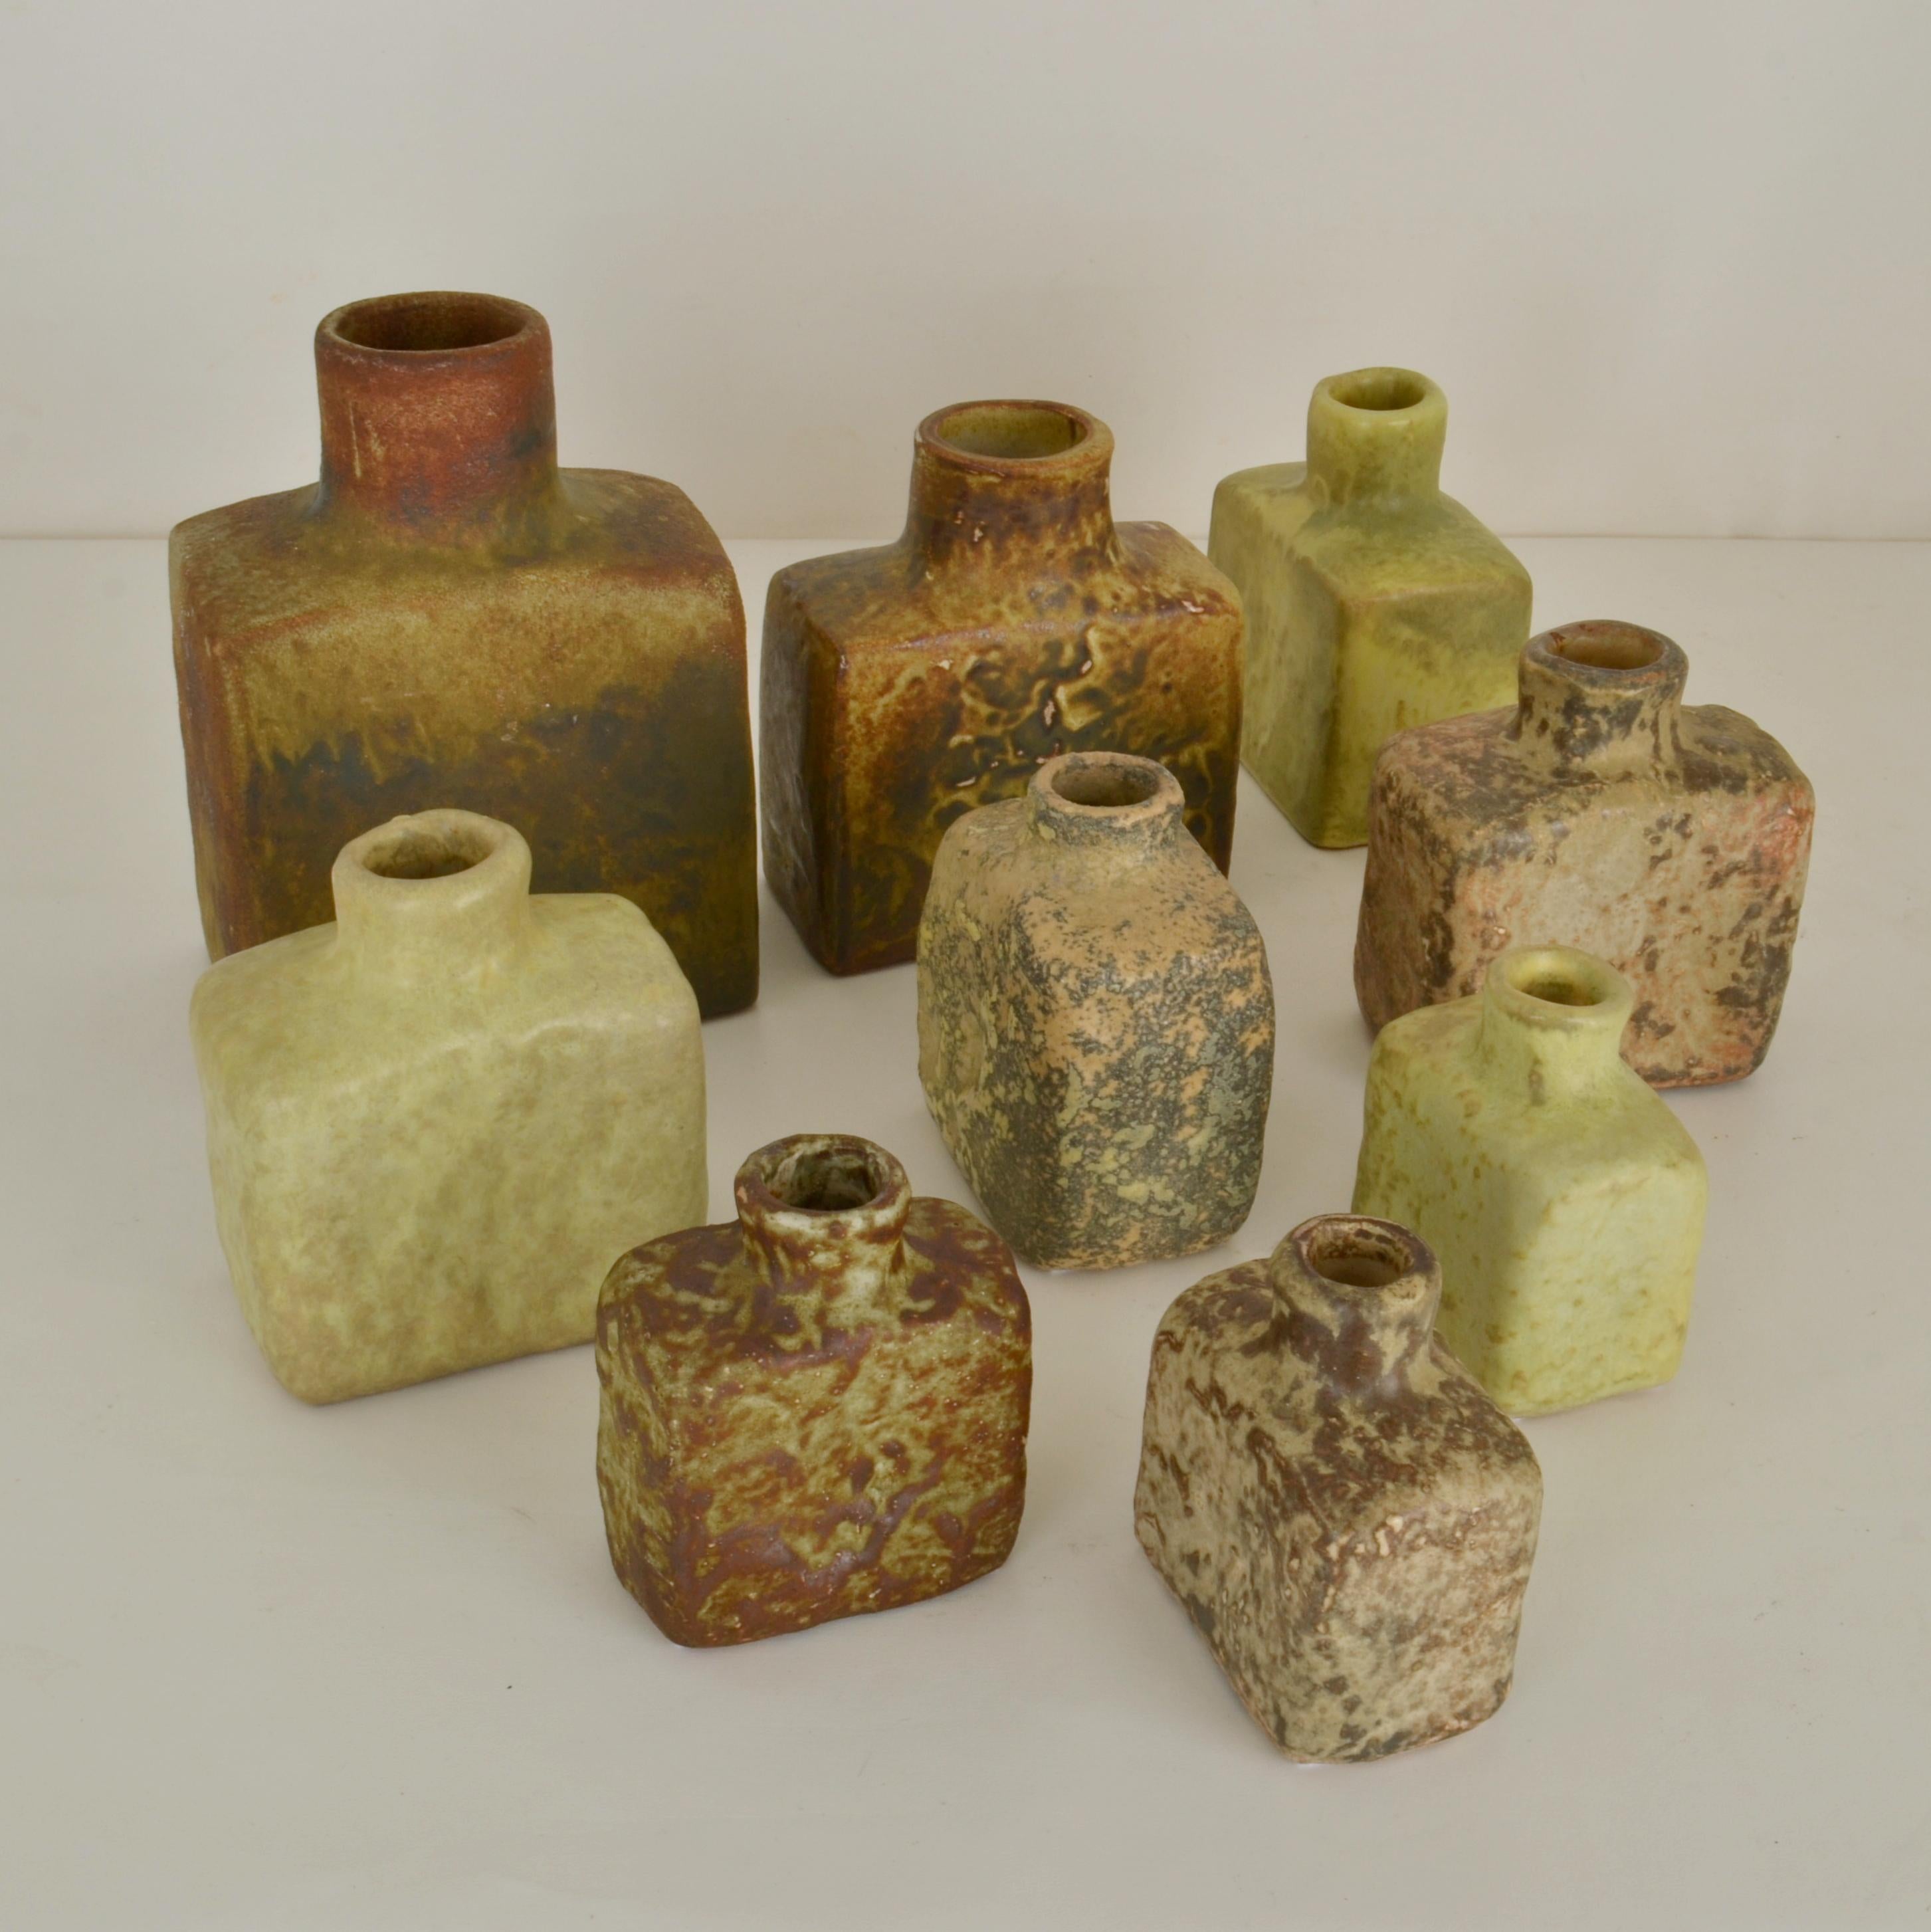 Group of Square Studio Ceramic Vases in Sage and Earth Tones 3